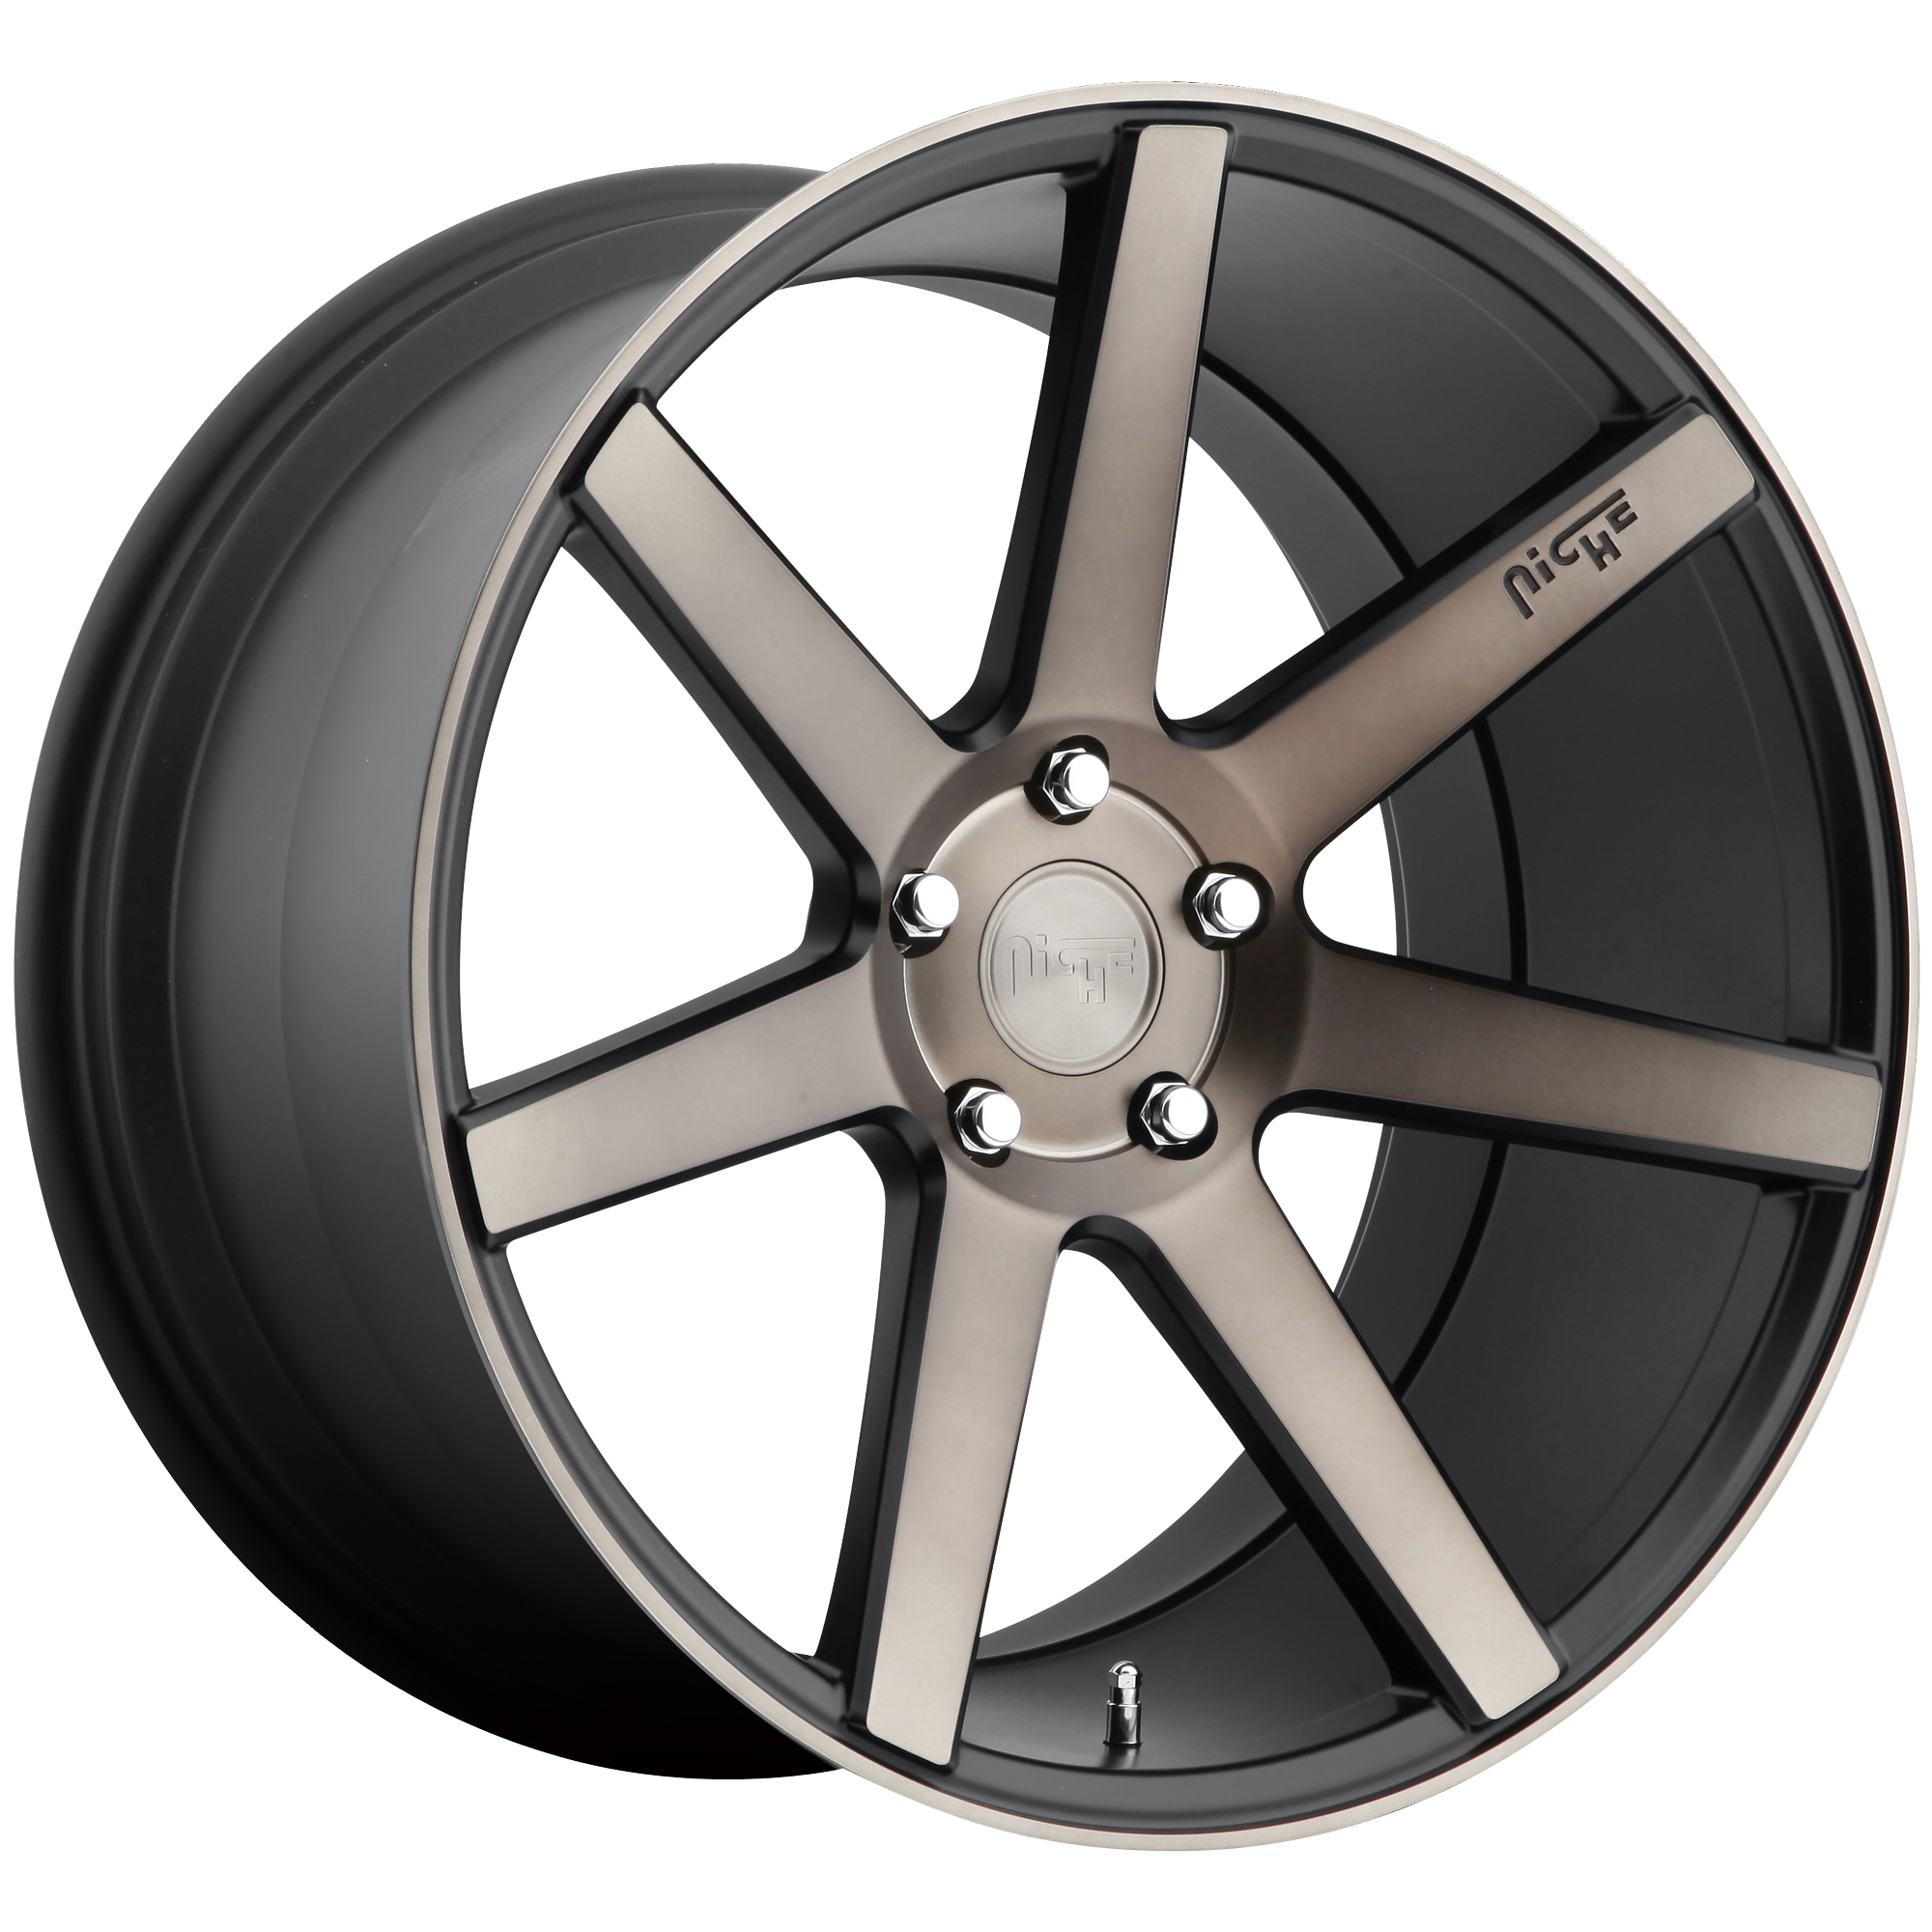 VERONA 19x8.5 5x120.00 MATTE BLACK MACHINED (35 mm) - Tires and Engine Performance